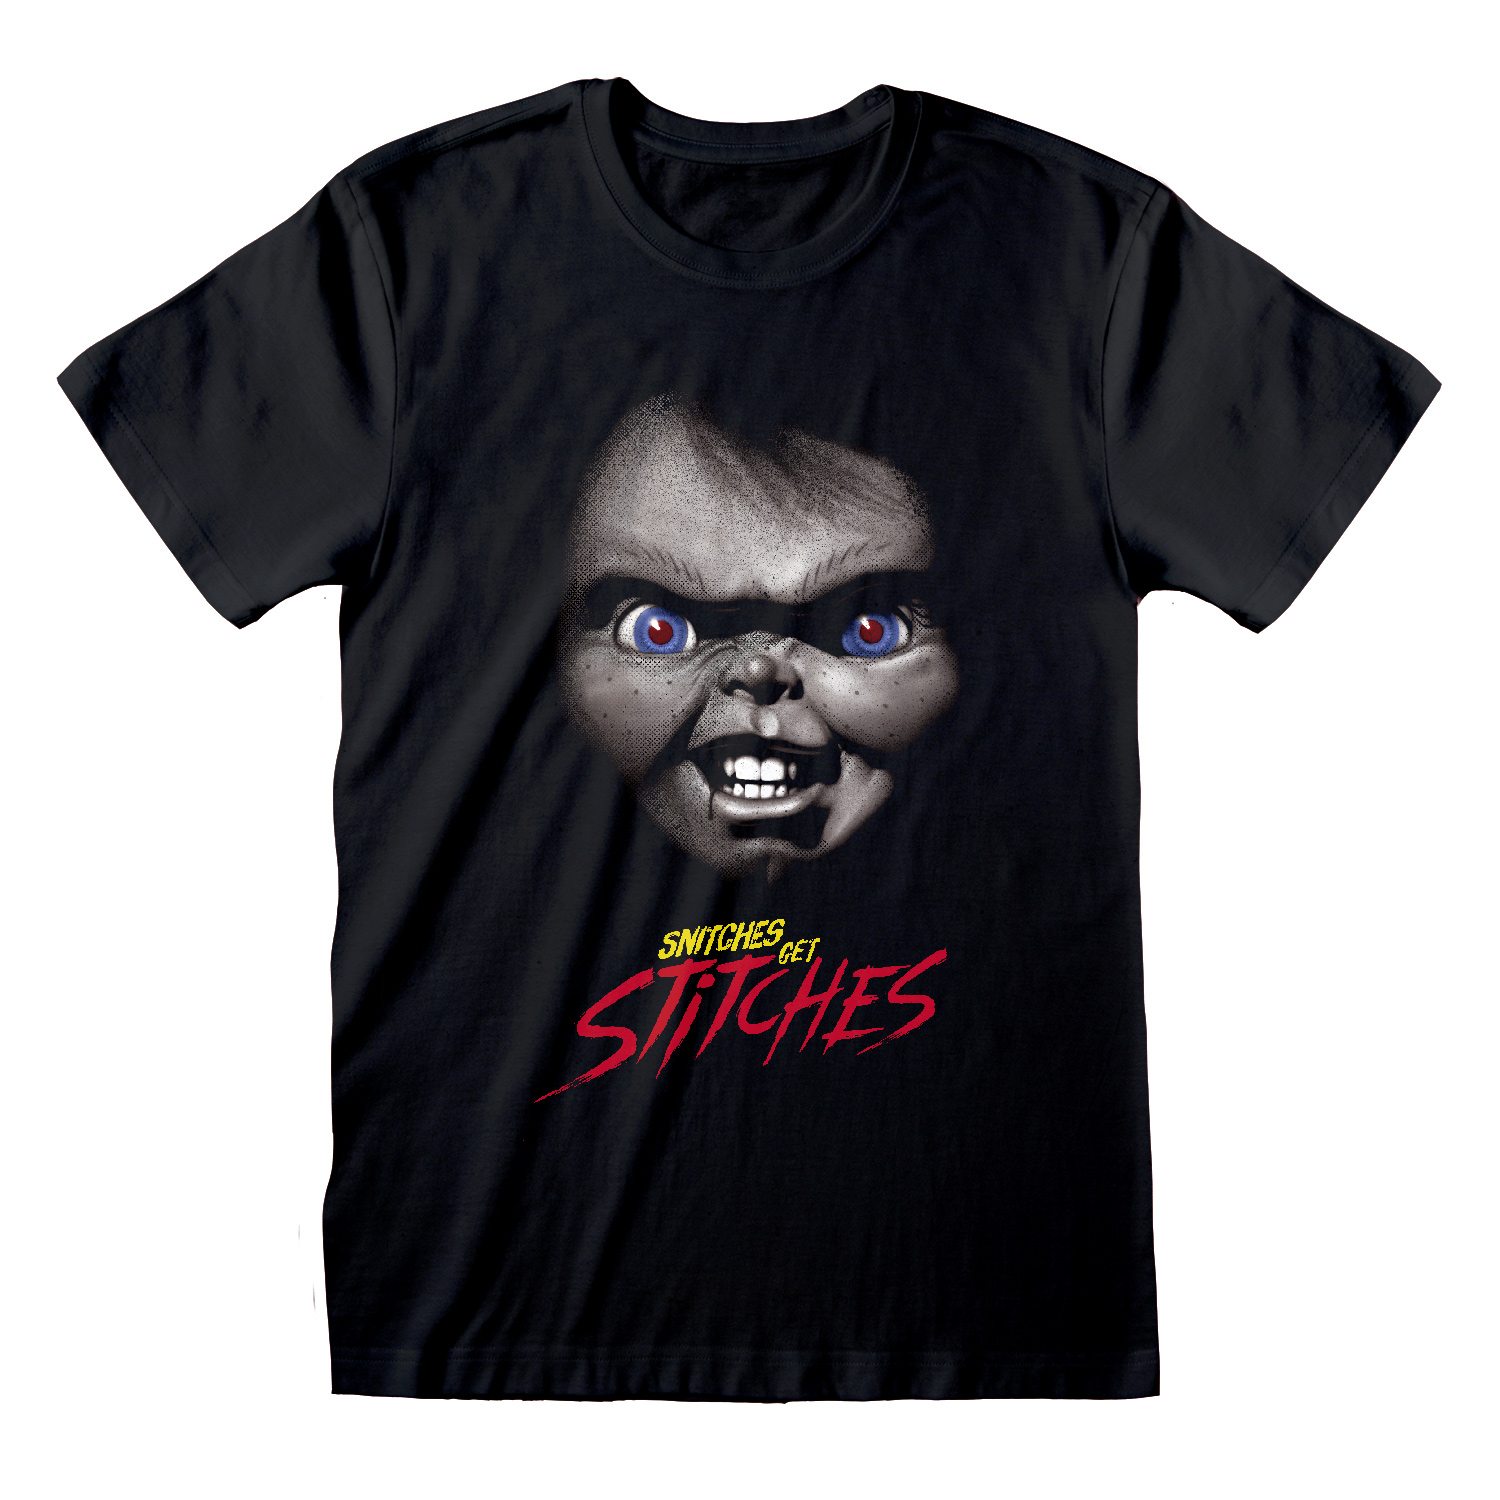 CHUCKY - Snitches Get Stitches - Unisex T-Shirt